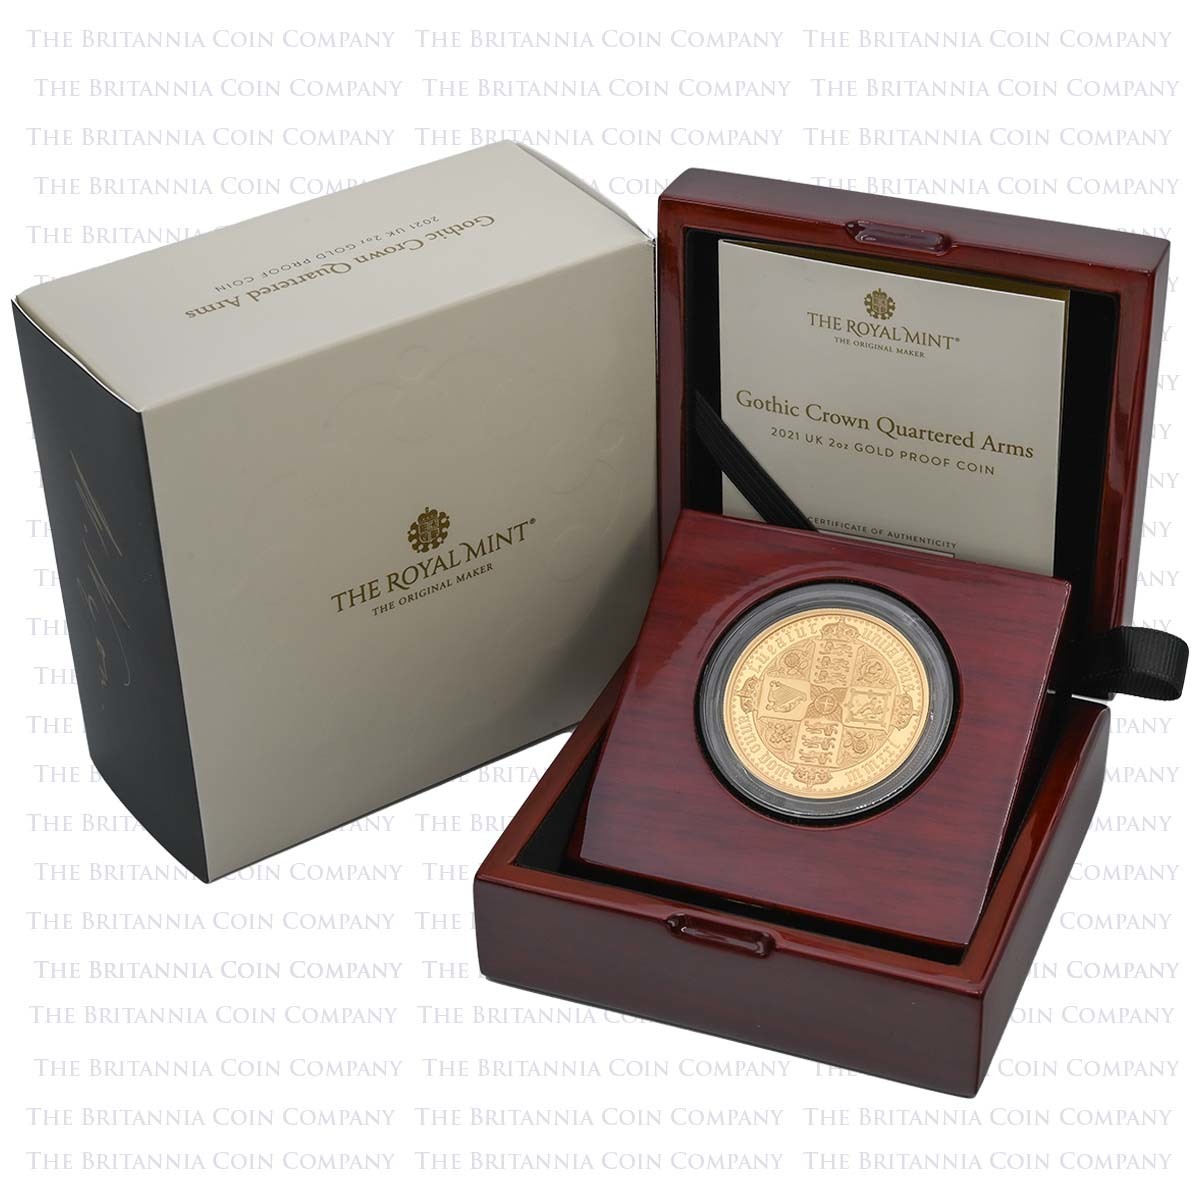 UK21GRG2 2021 Great Engravers Gothic Crown Quartered Arms 2 Ounce Gold Proof Boxed